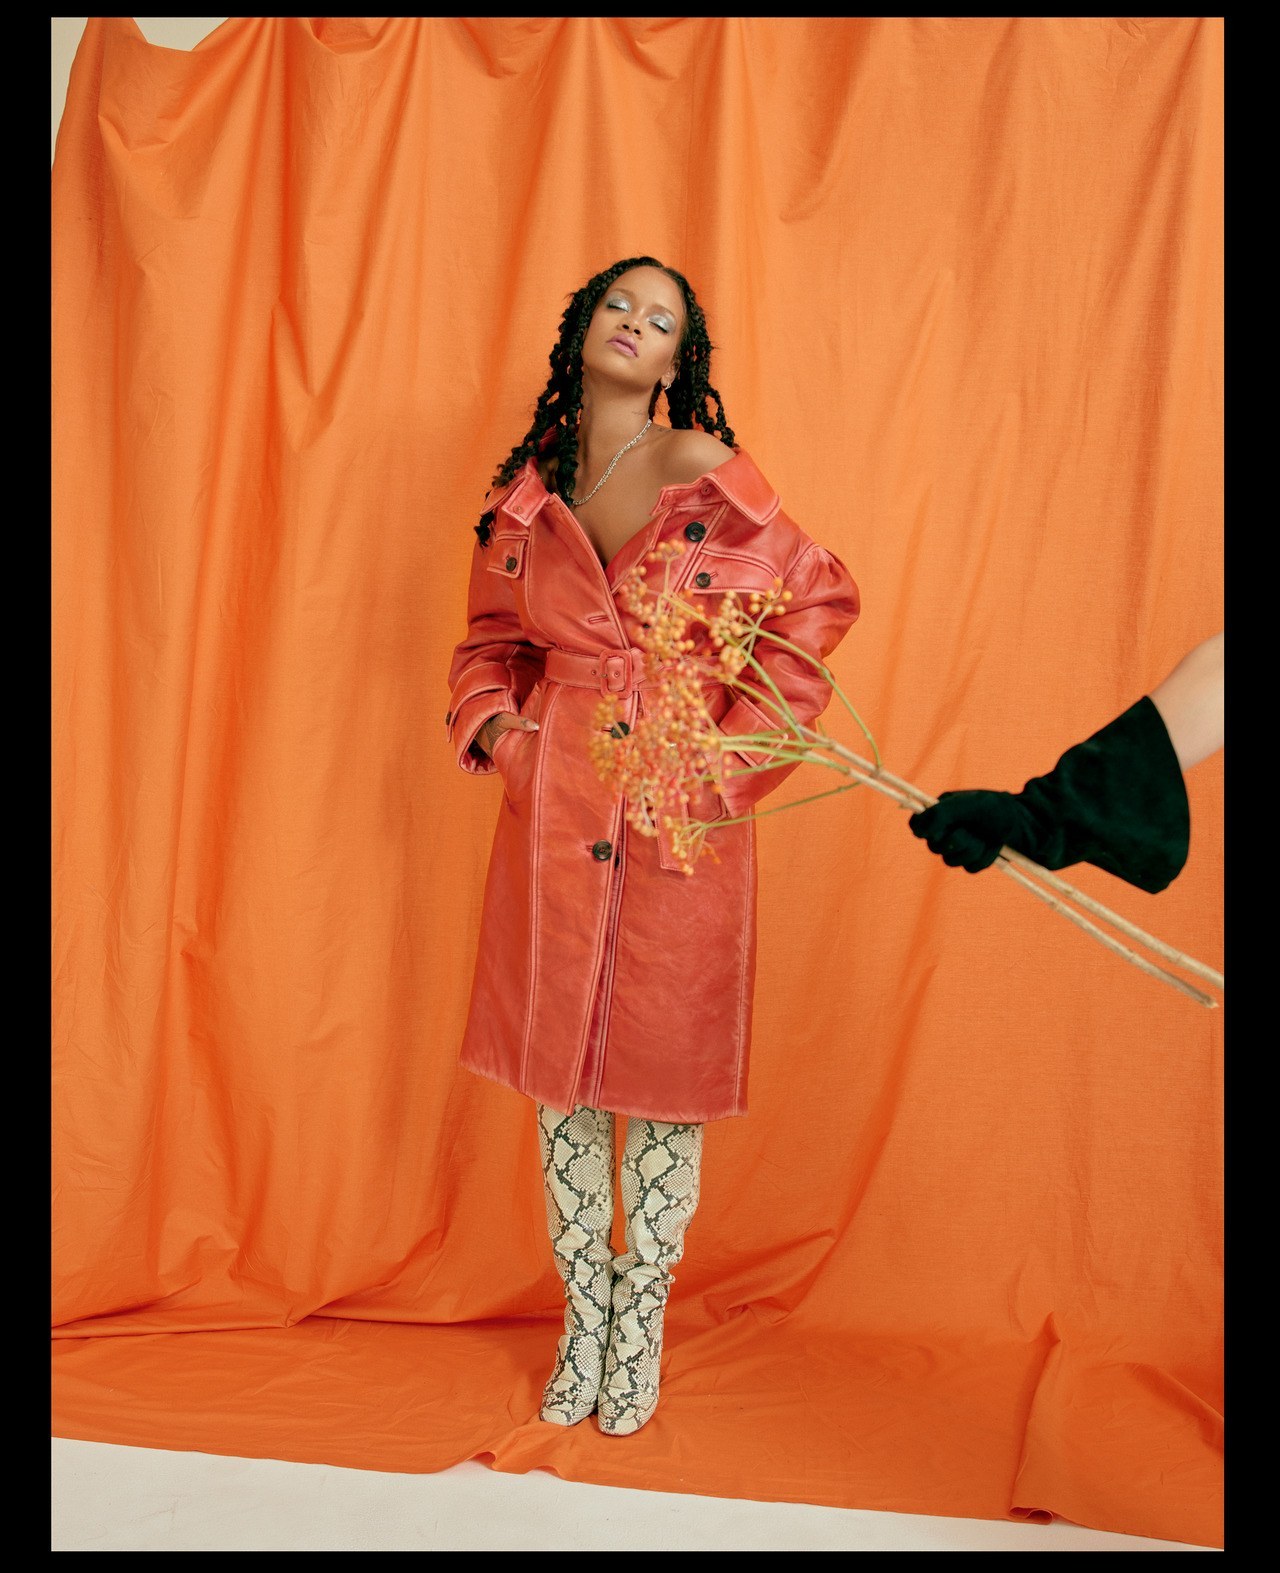 Rihanna for Allure October 2018Wearing: Miu Miu coat, Rochas boots, Maria Tash earrings, and Chrome Hearts necklace
Photography: Nadine Ijewere
Styling: Jahleel Weaver
Hair: Yusef Williams
Makeup: Priscilla Ono
Manicure: Maria Salandra